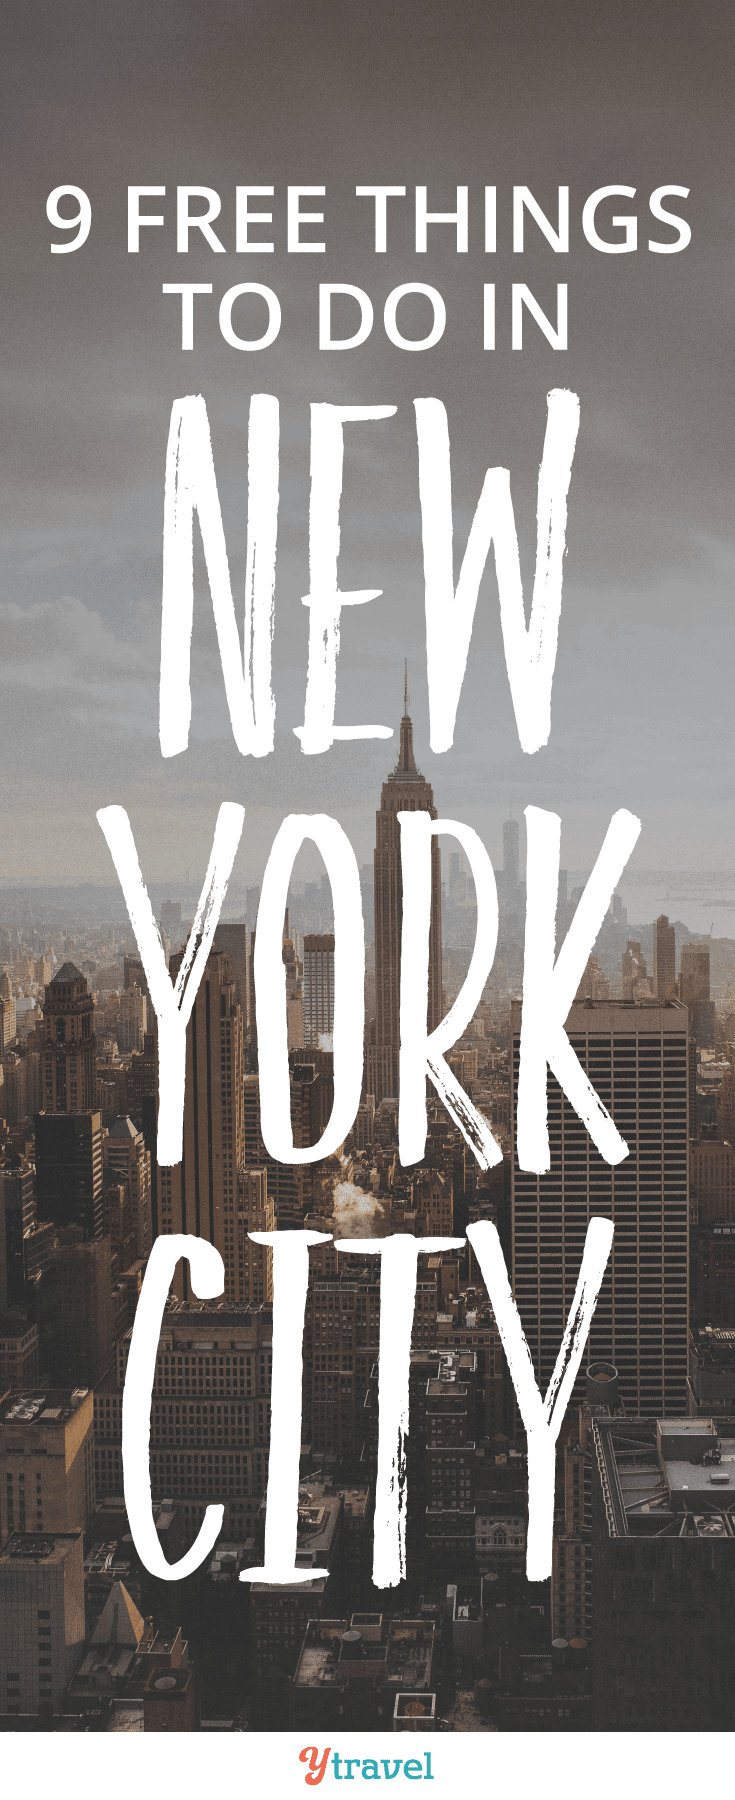 Need tips on FREE things to do in NYC? Christine shares her top 9 things to do in new York that won't cost you a cent, one of them $1. What a great way to visit NYC!!